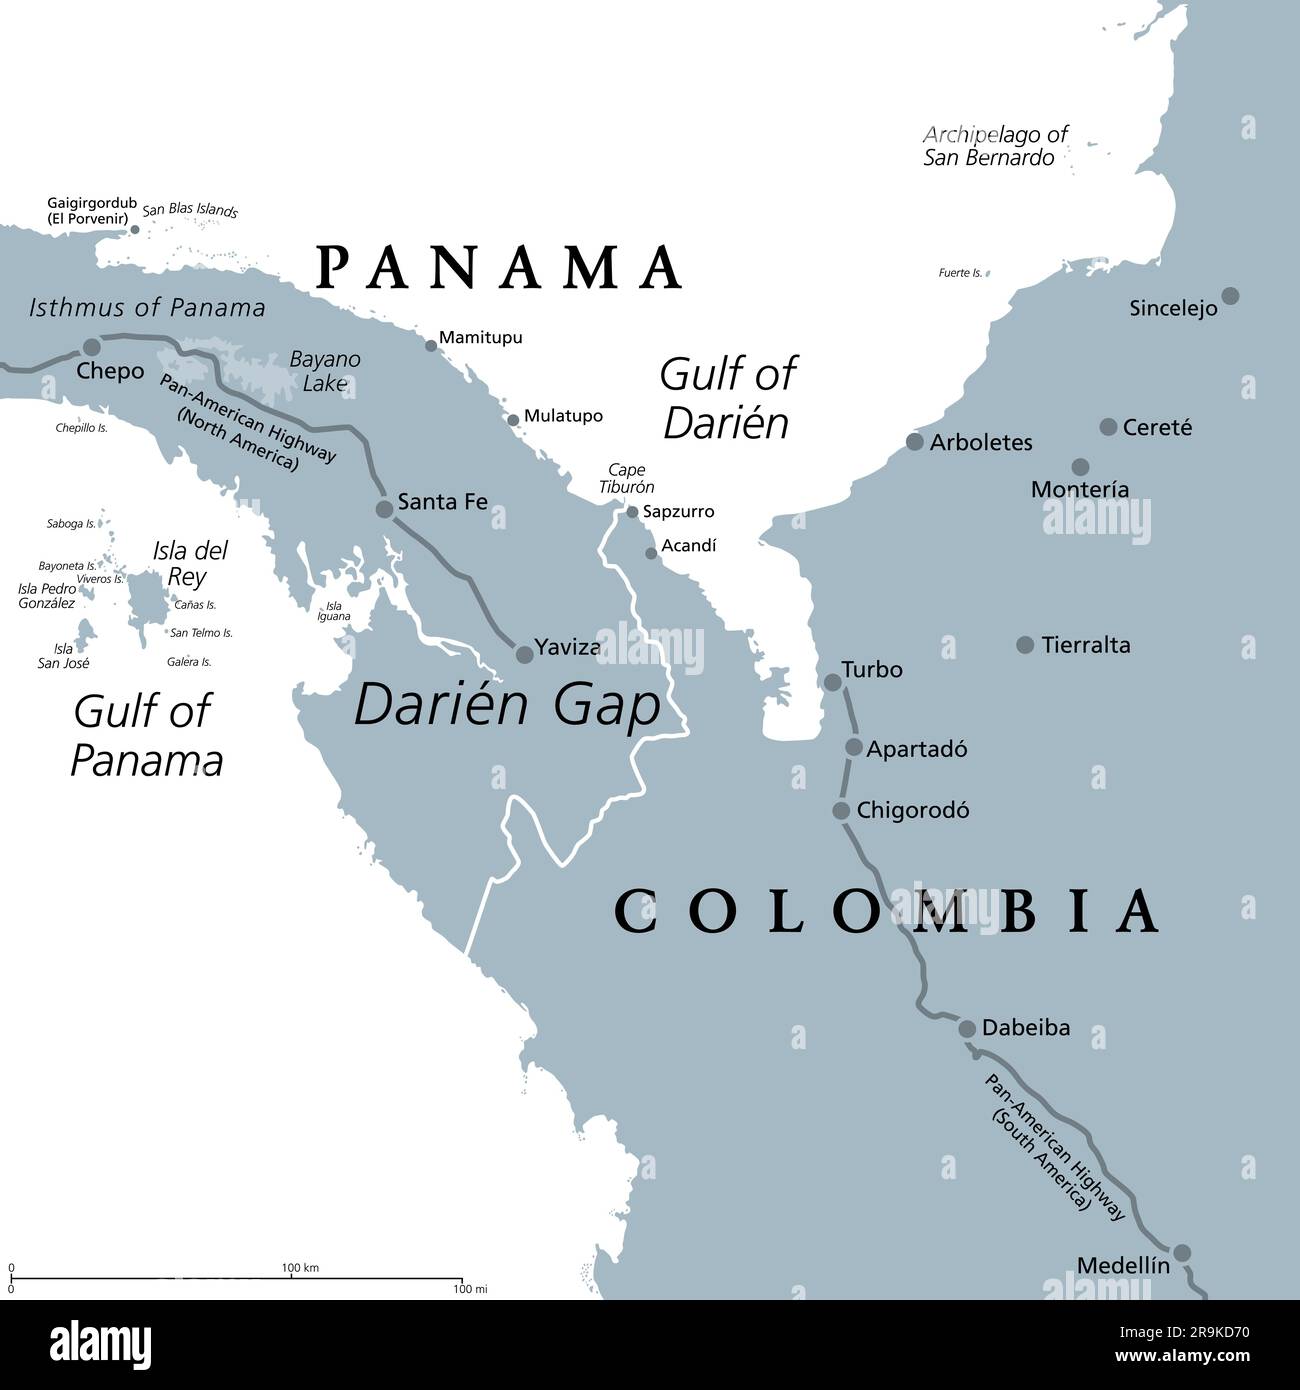 Darien Gap, gray political map. Region in the Isthmus of Panama, connecting North and South America with Central America. Stock Photo